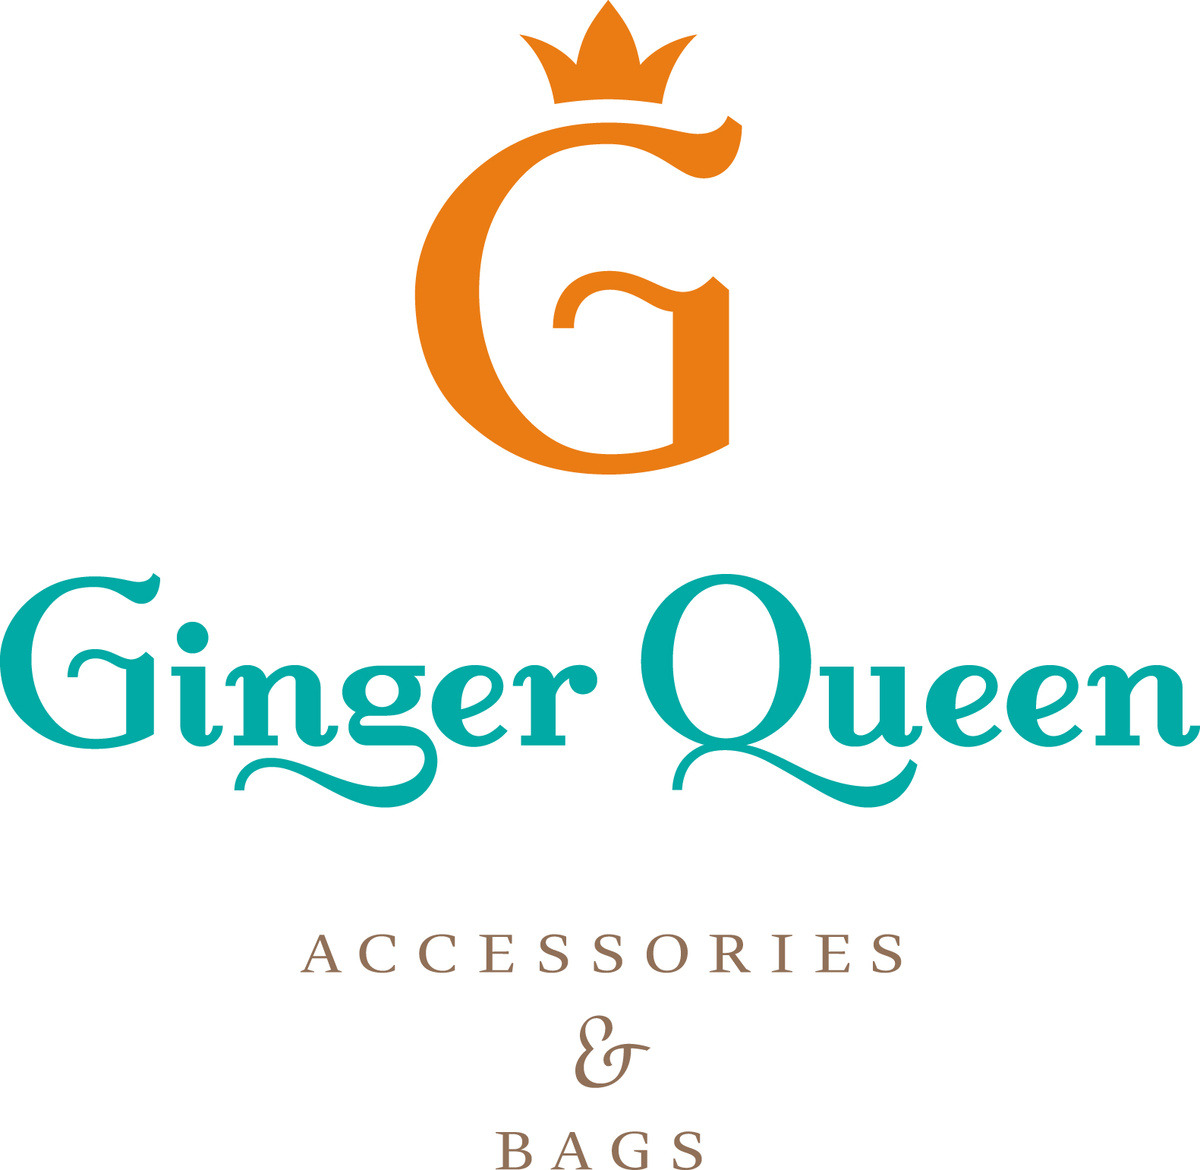 The ginger queen